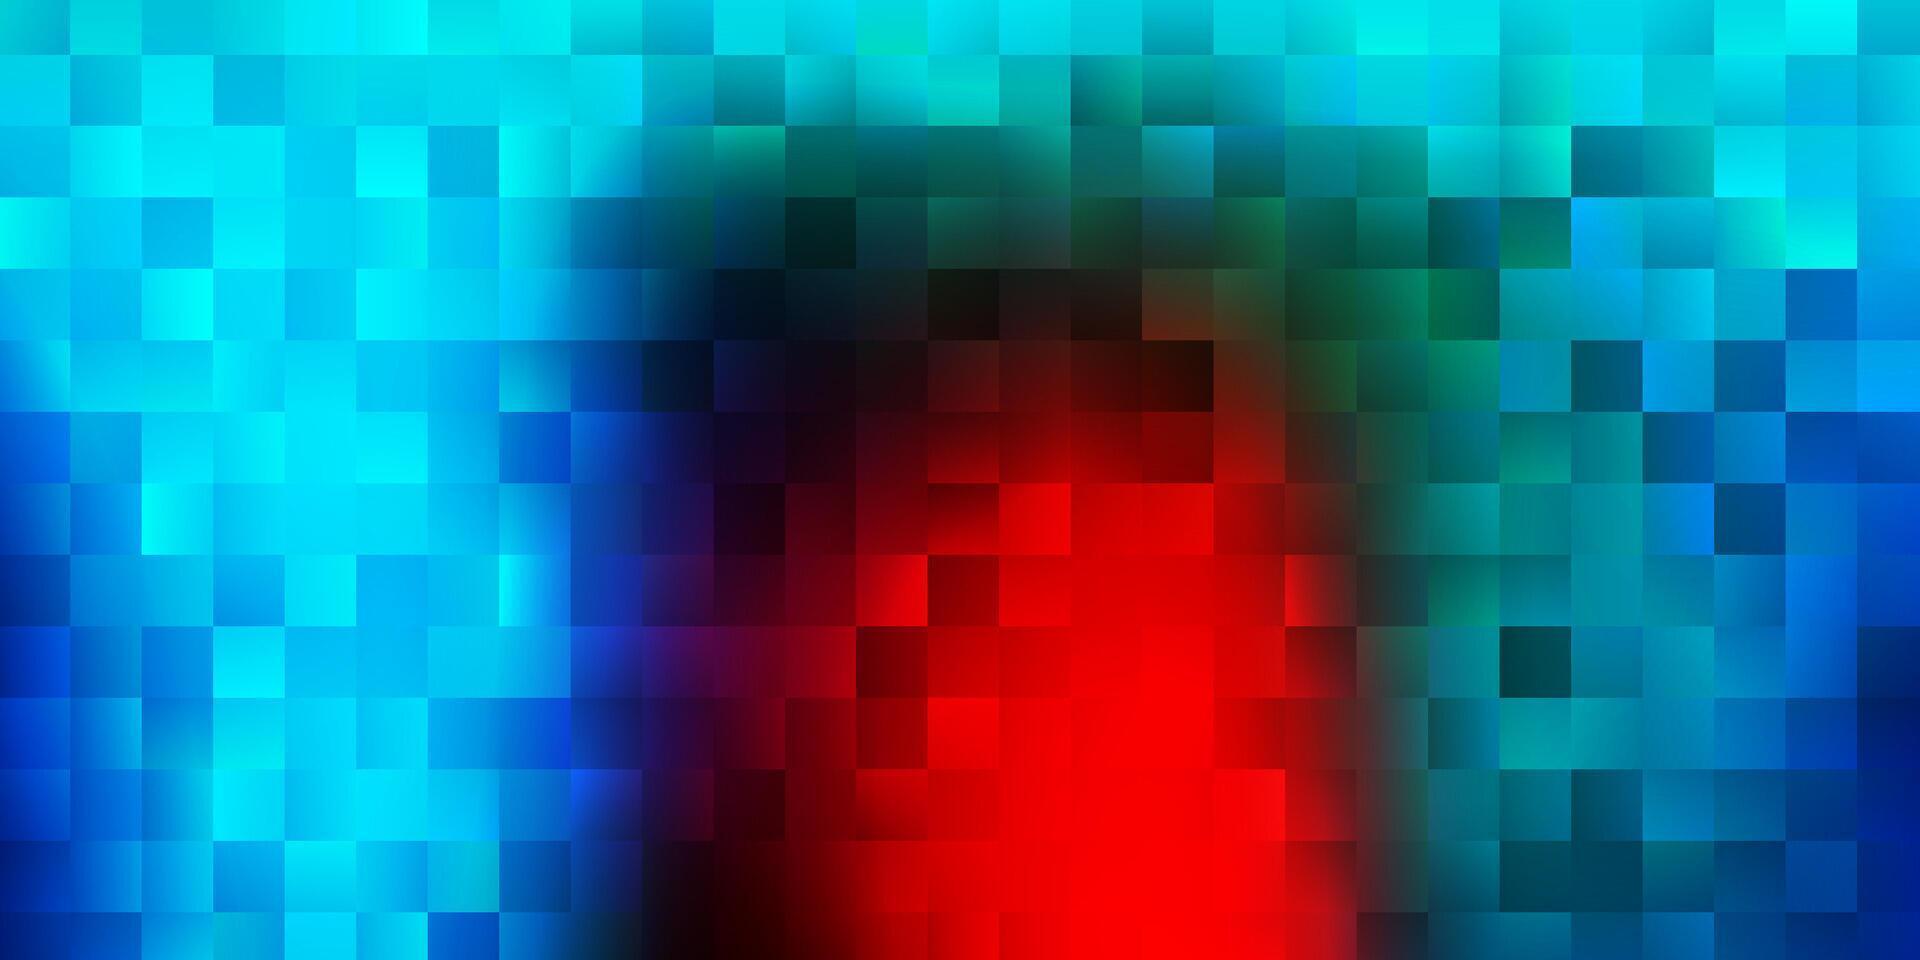 Light blue, red vector pattern with rectangles.